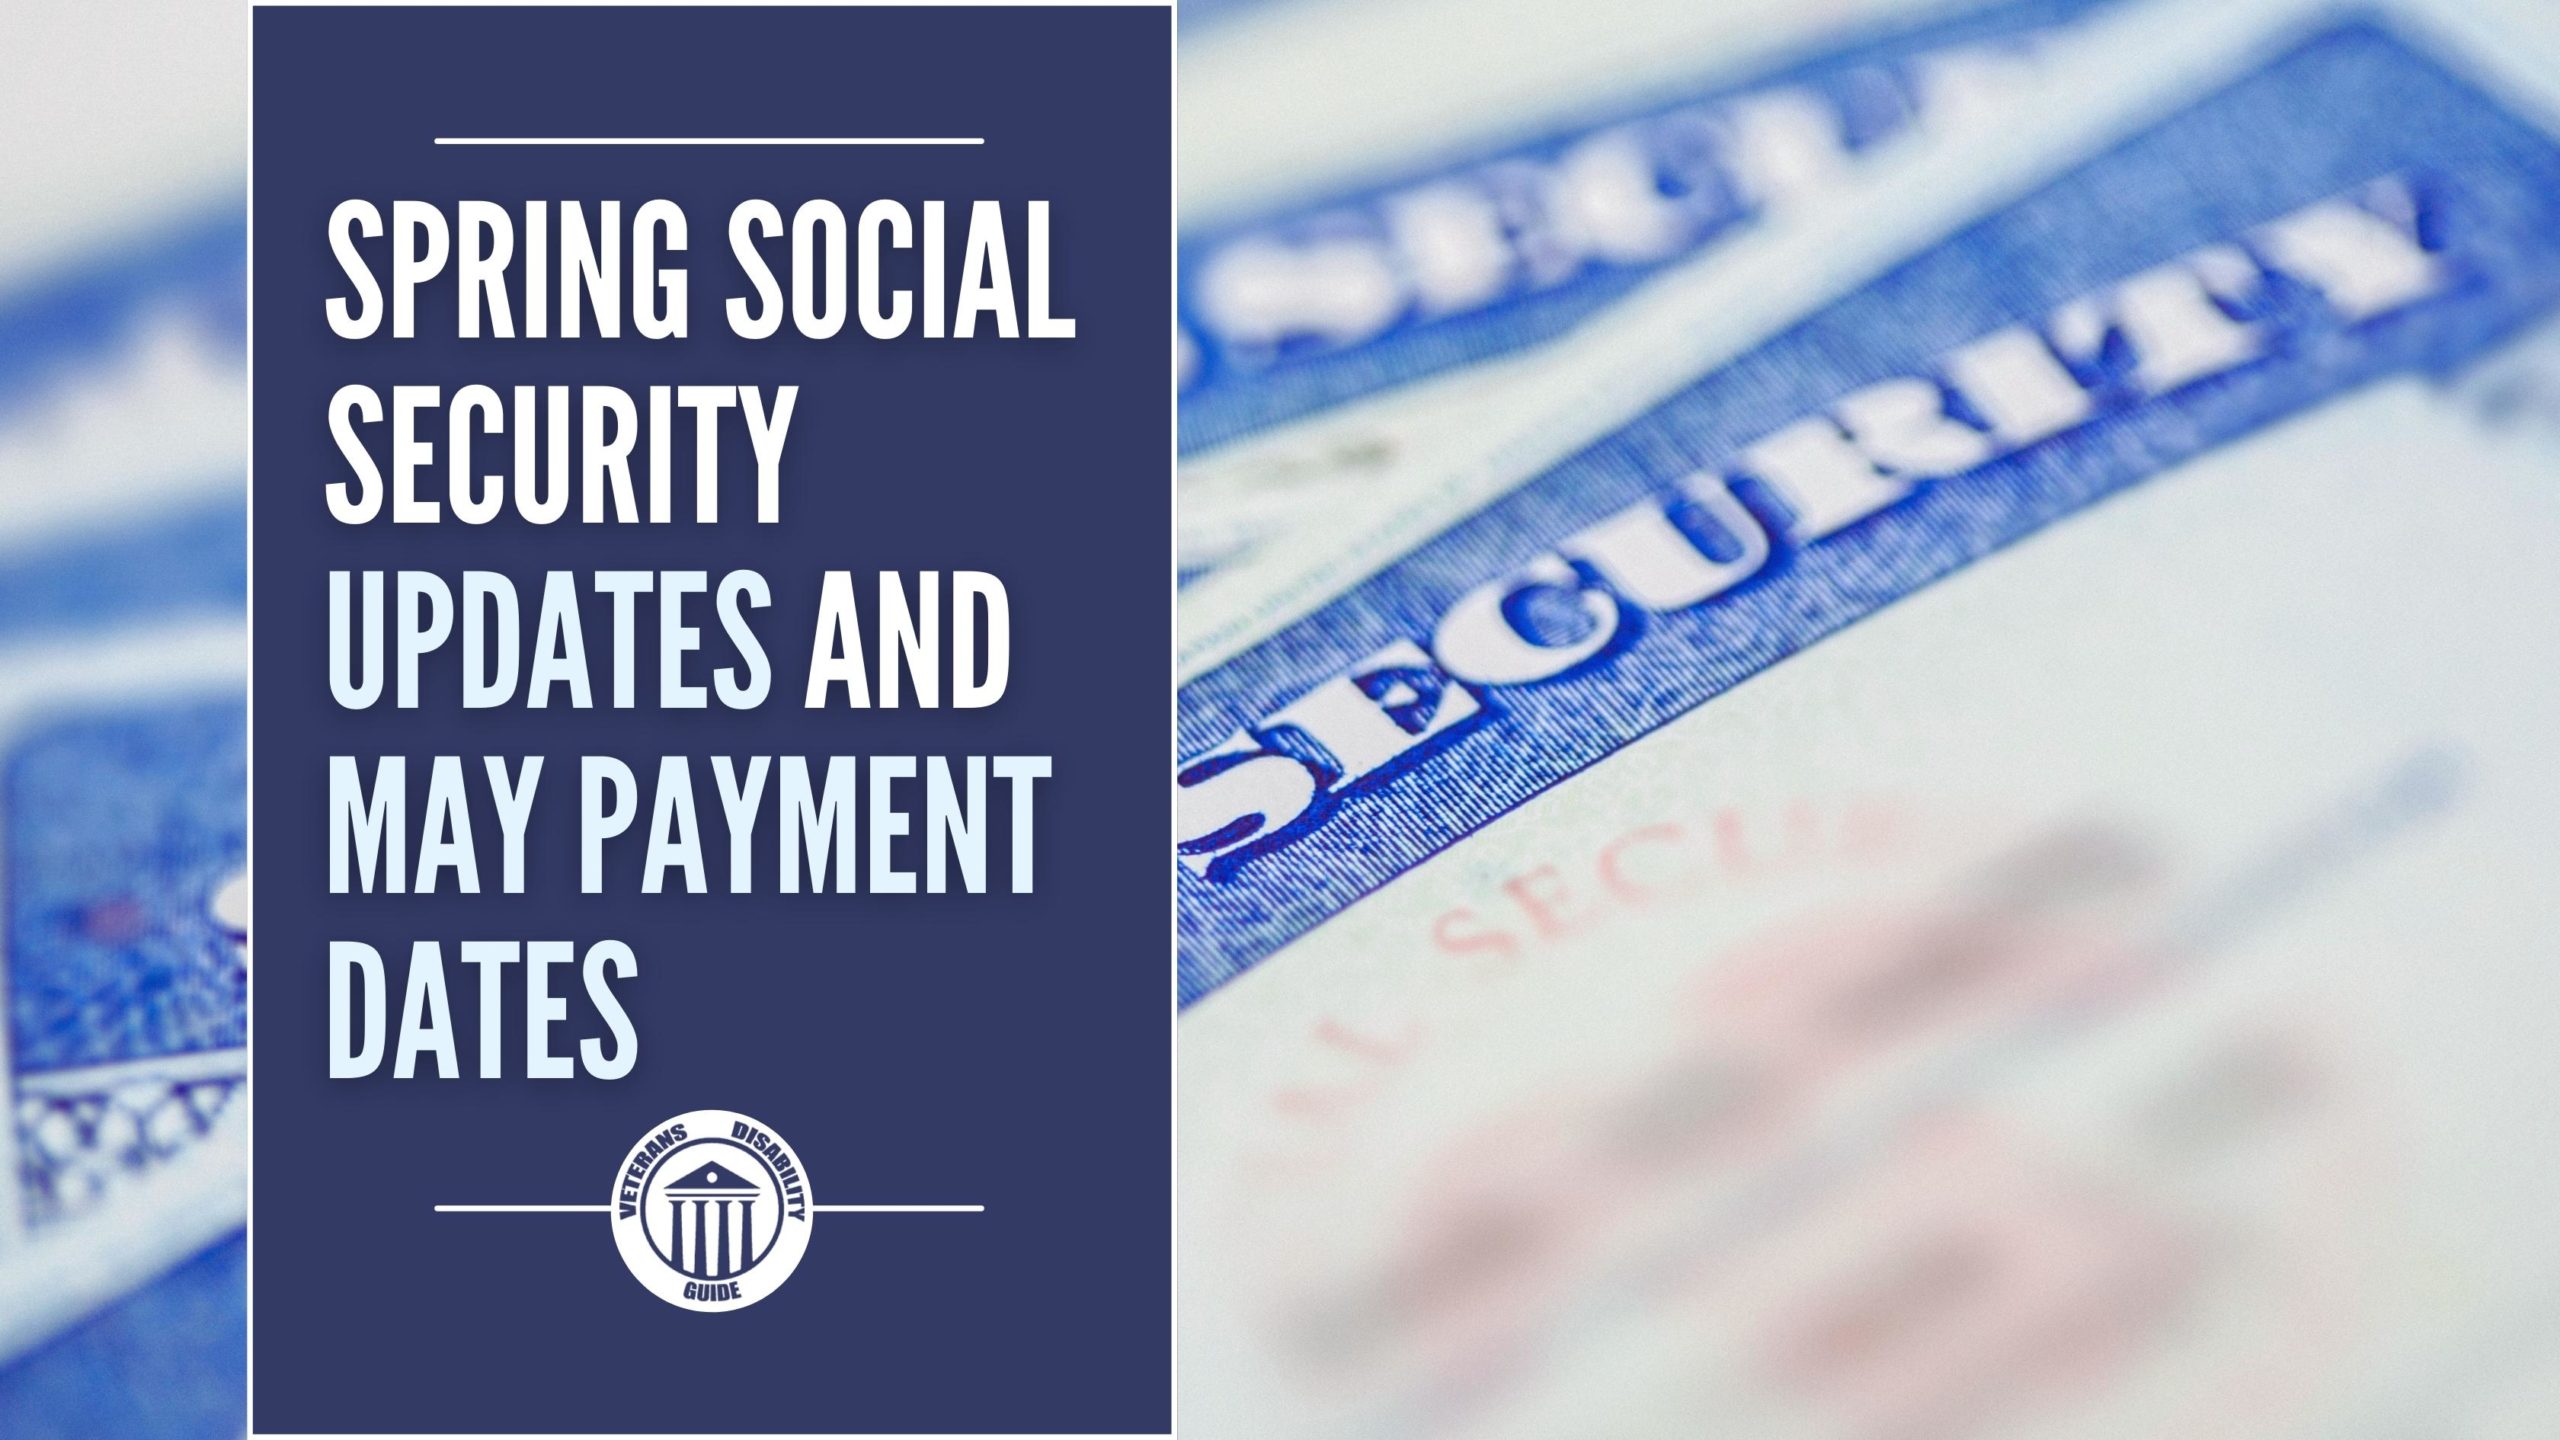 Title: Spring Social Security Updates and May Payment Dates, image of social security cards